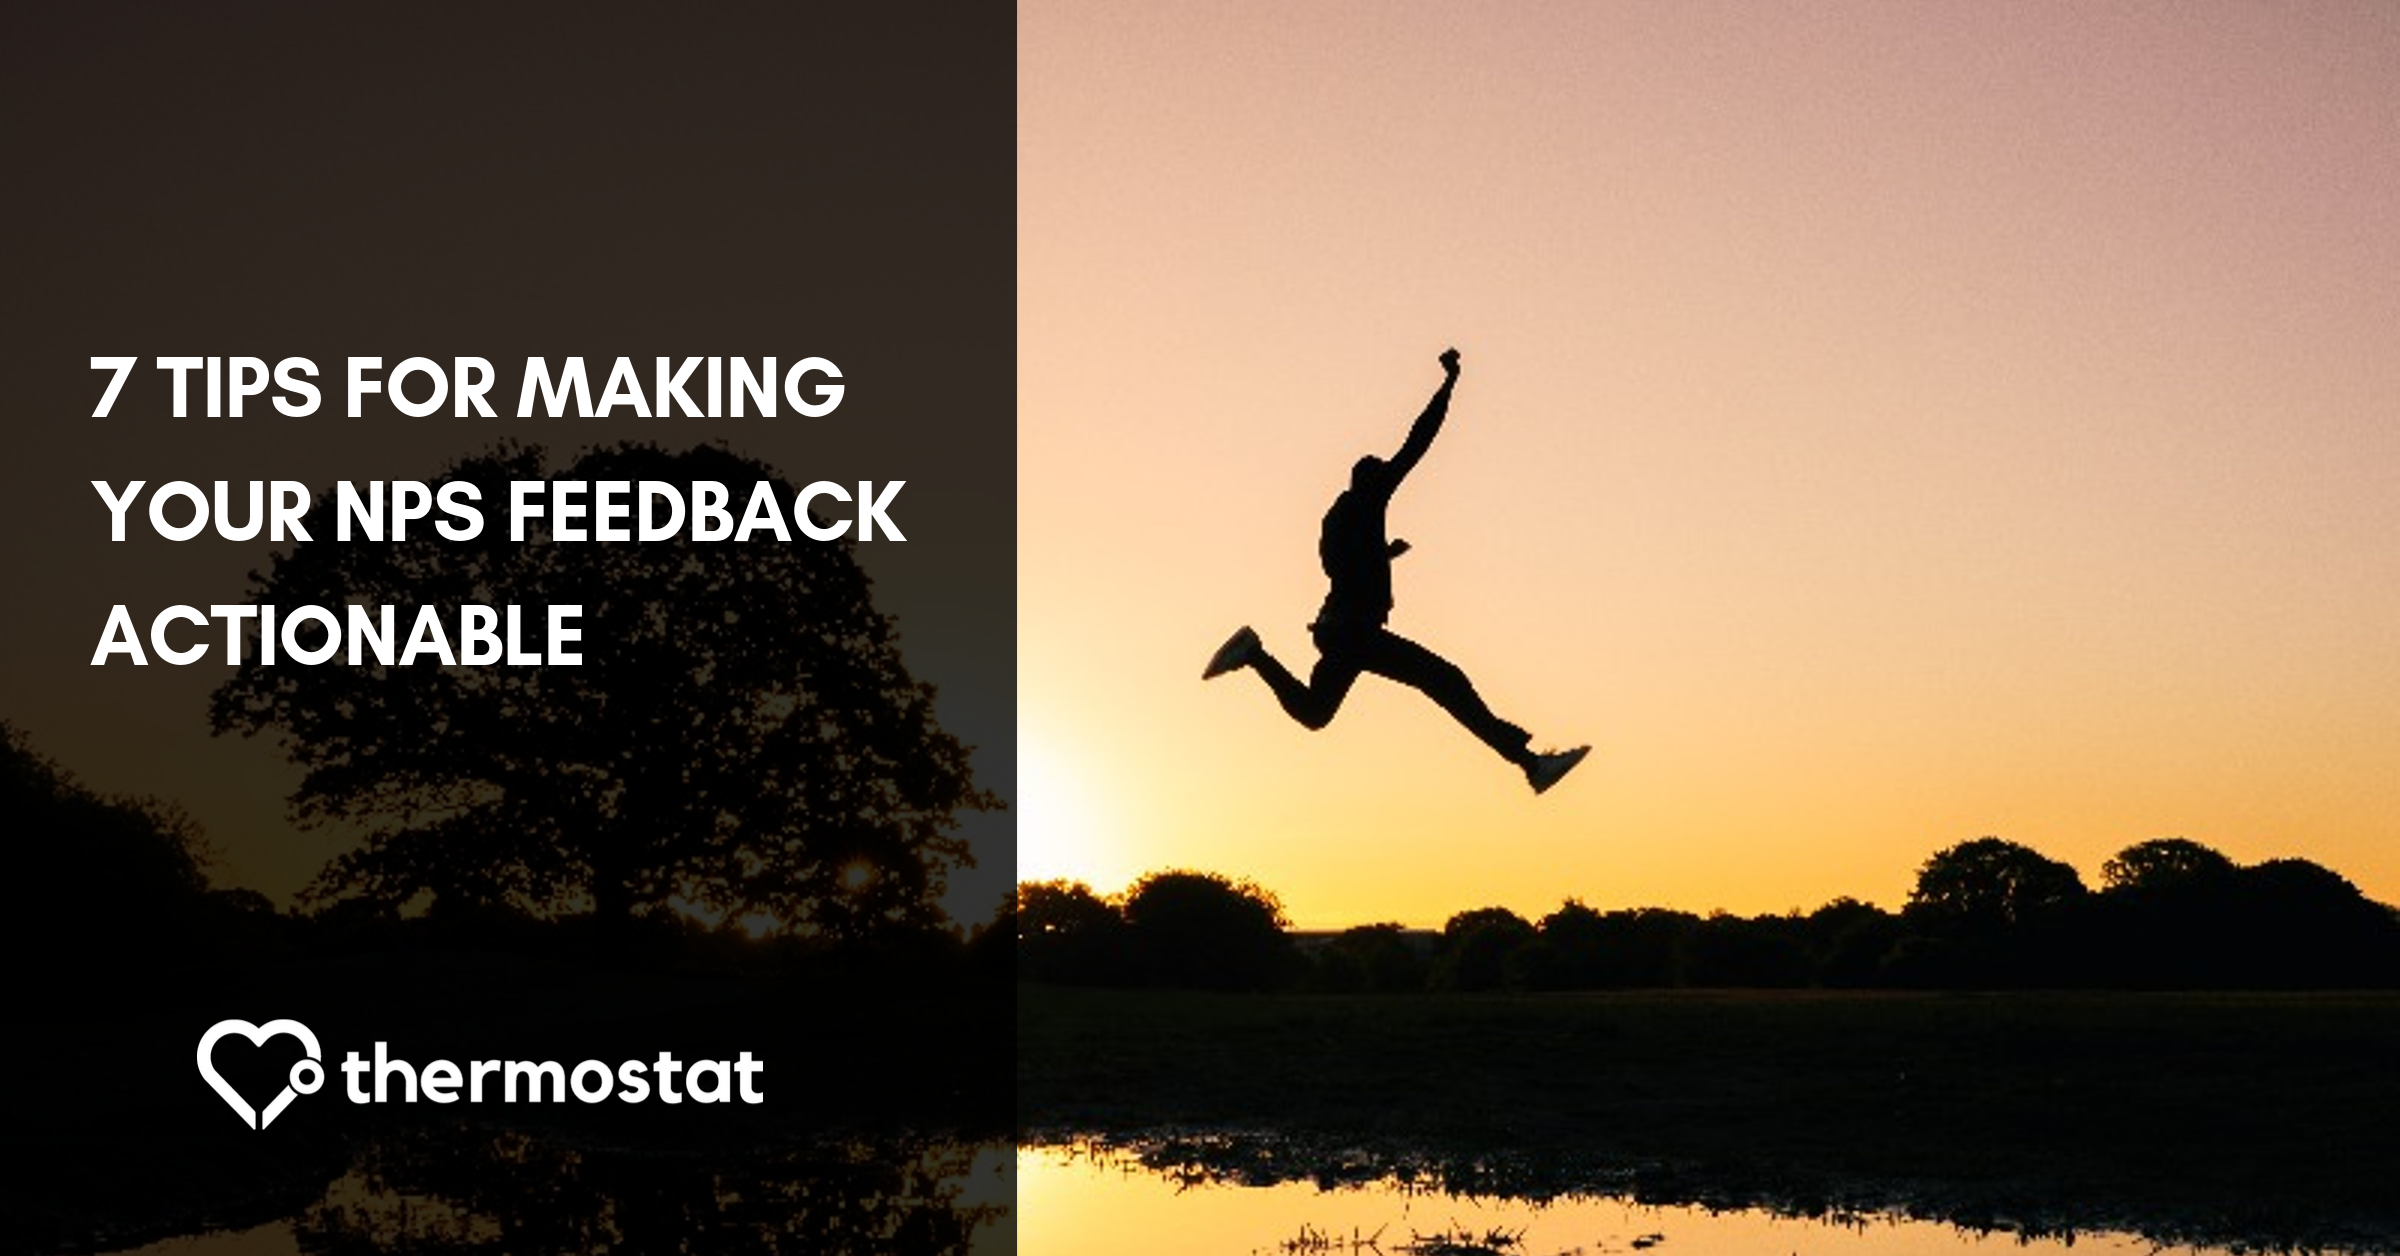 7 Tips for Making Your NPS Feedback Actionable cover photo